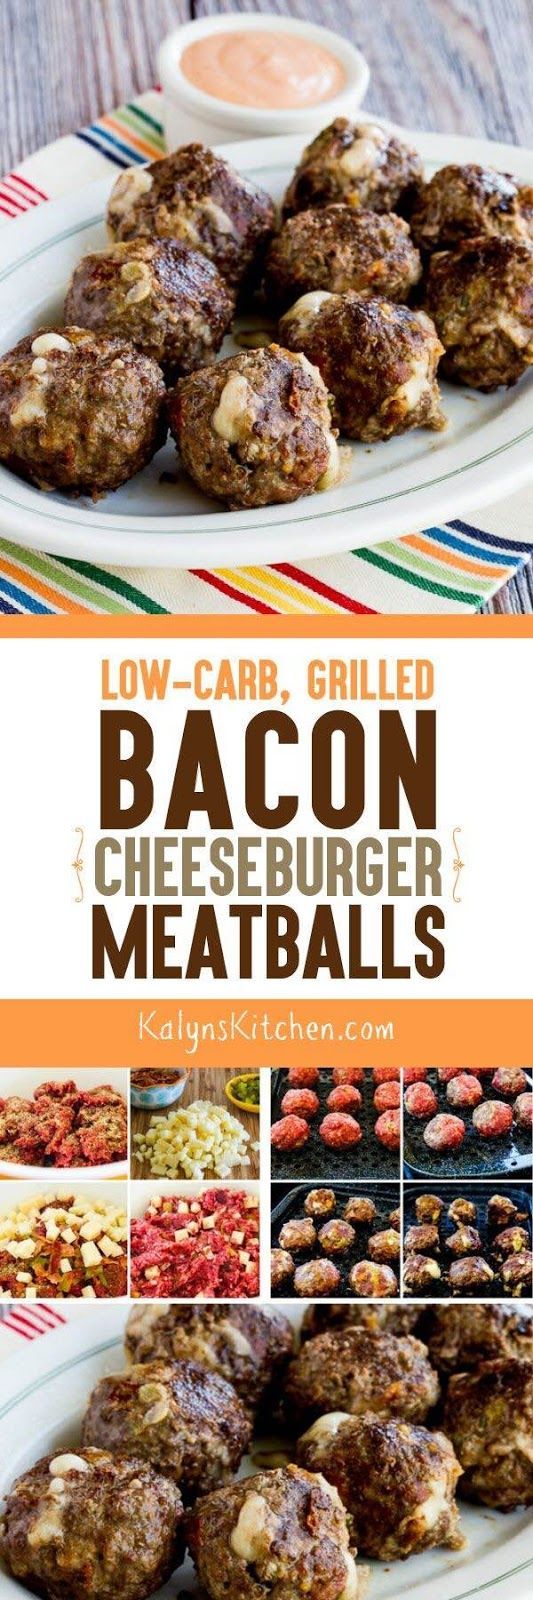 Low-Carb Grilled Bacon Cheeseburger Meatballs have comfort food written all over them! These meatballs have all the flavors of